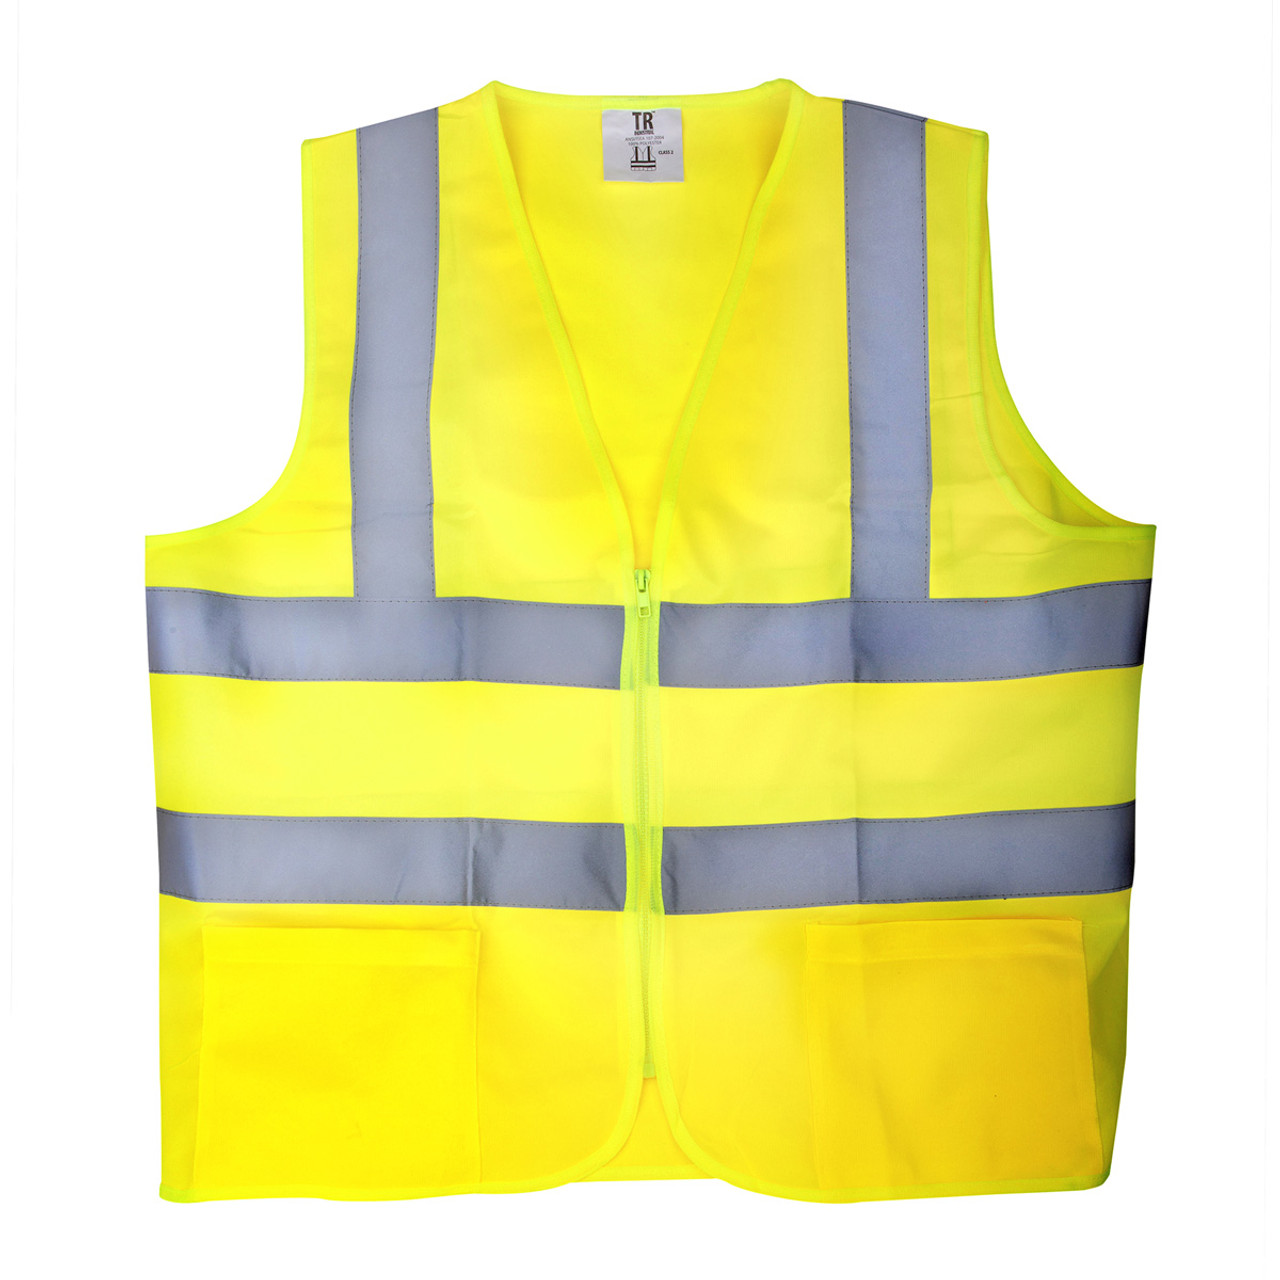 TR Industrial Yellow Knitted Safety Vest, Size 5XL, 2-Pocket with Zipper, Pack of 5